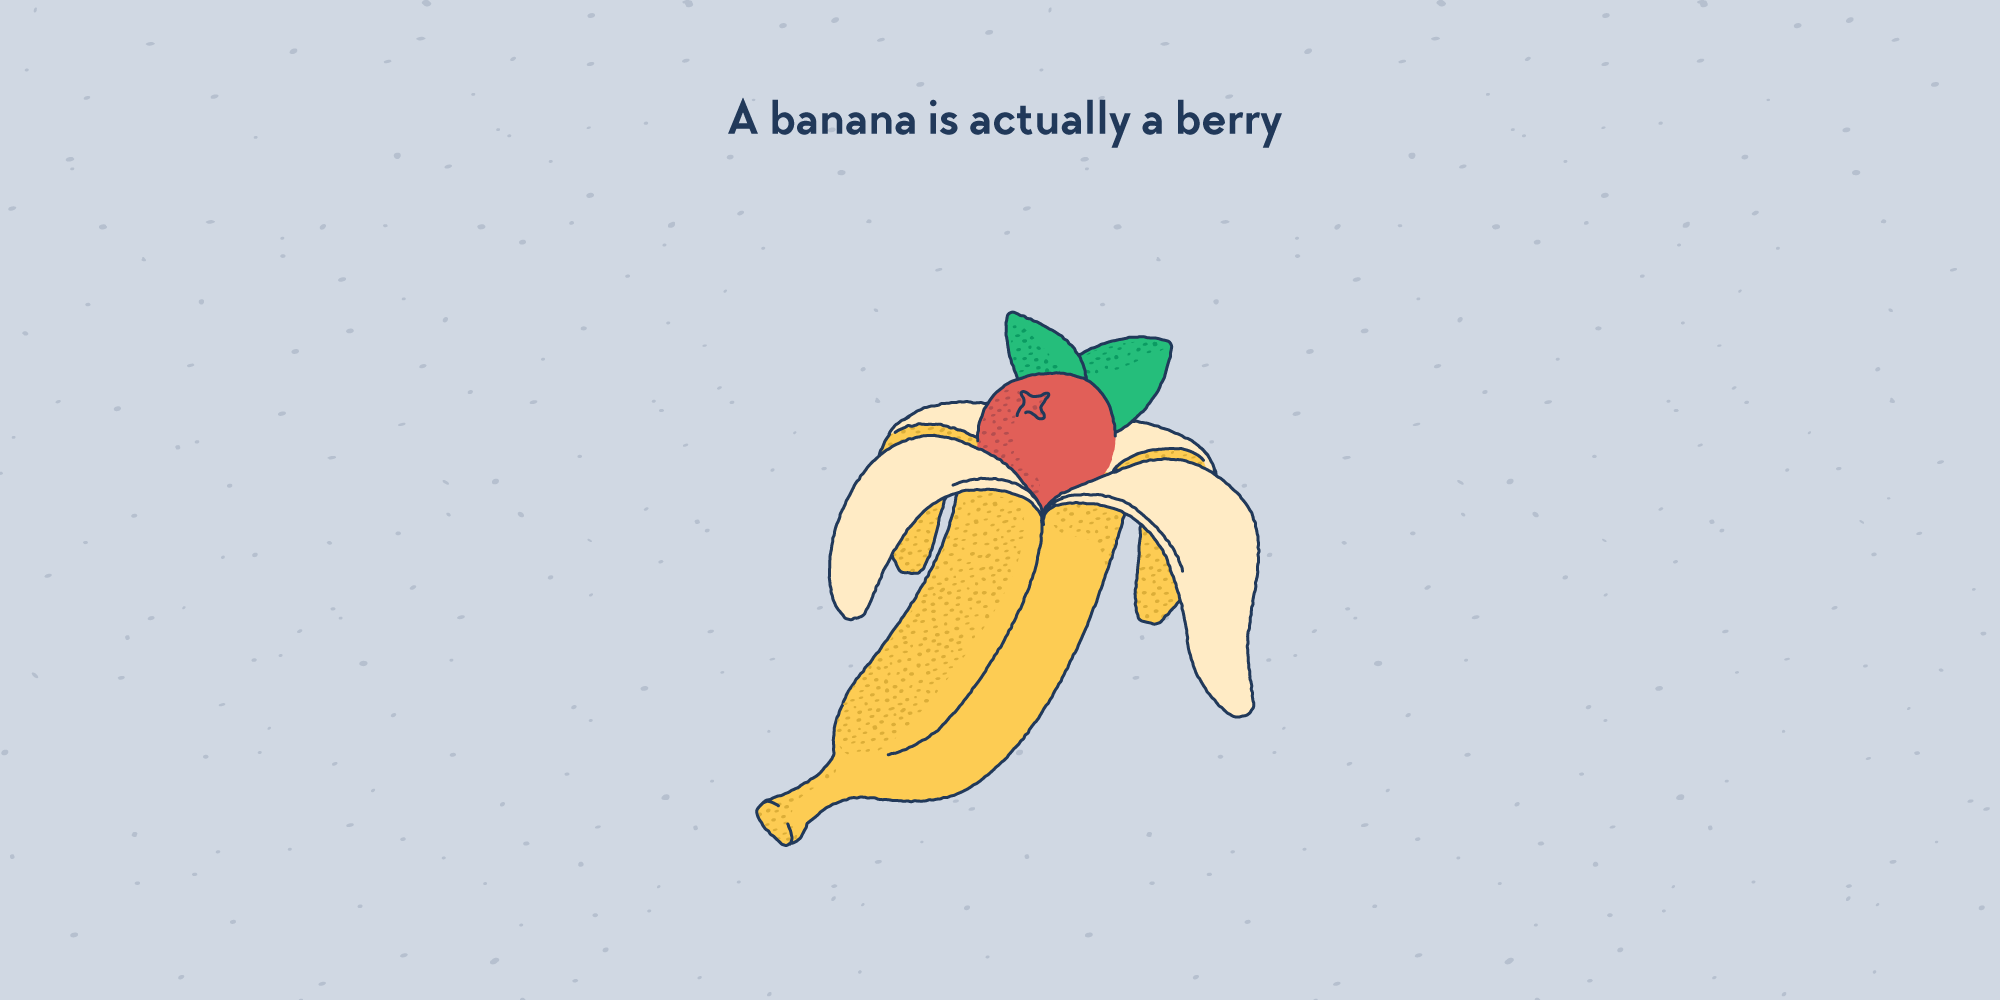 A banana being peeled, with a red berry in the middle in place of an actual banana.